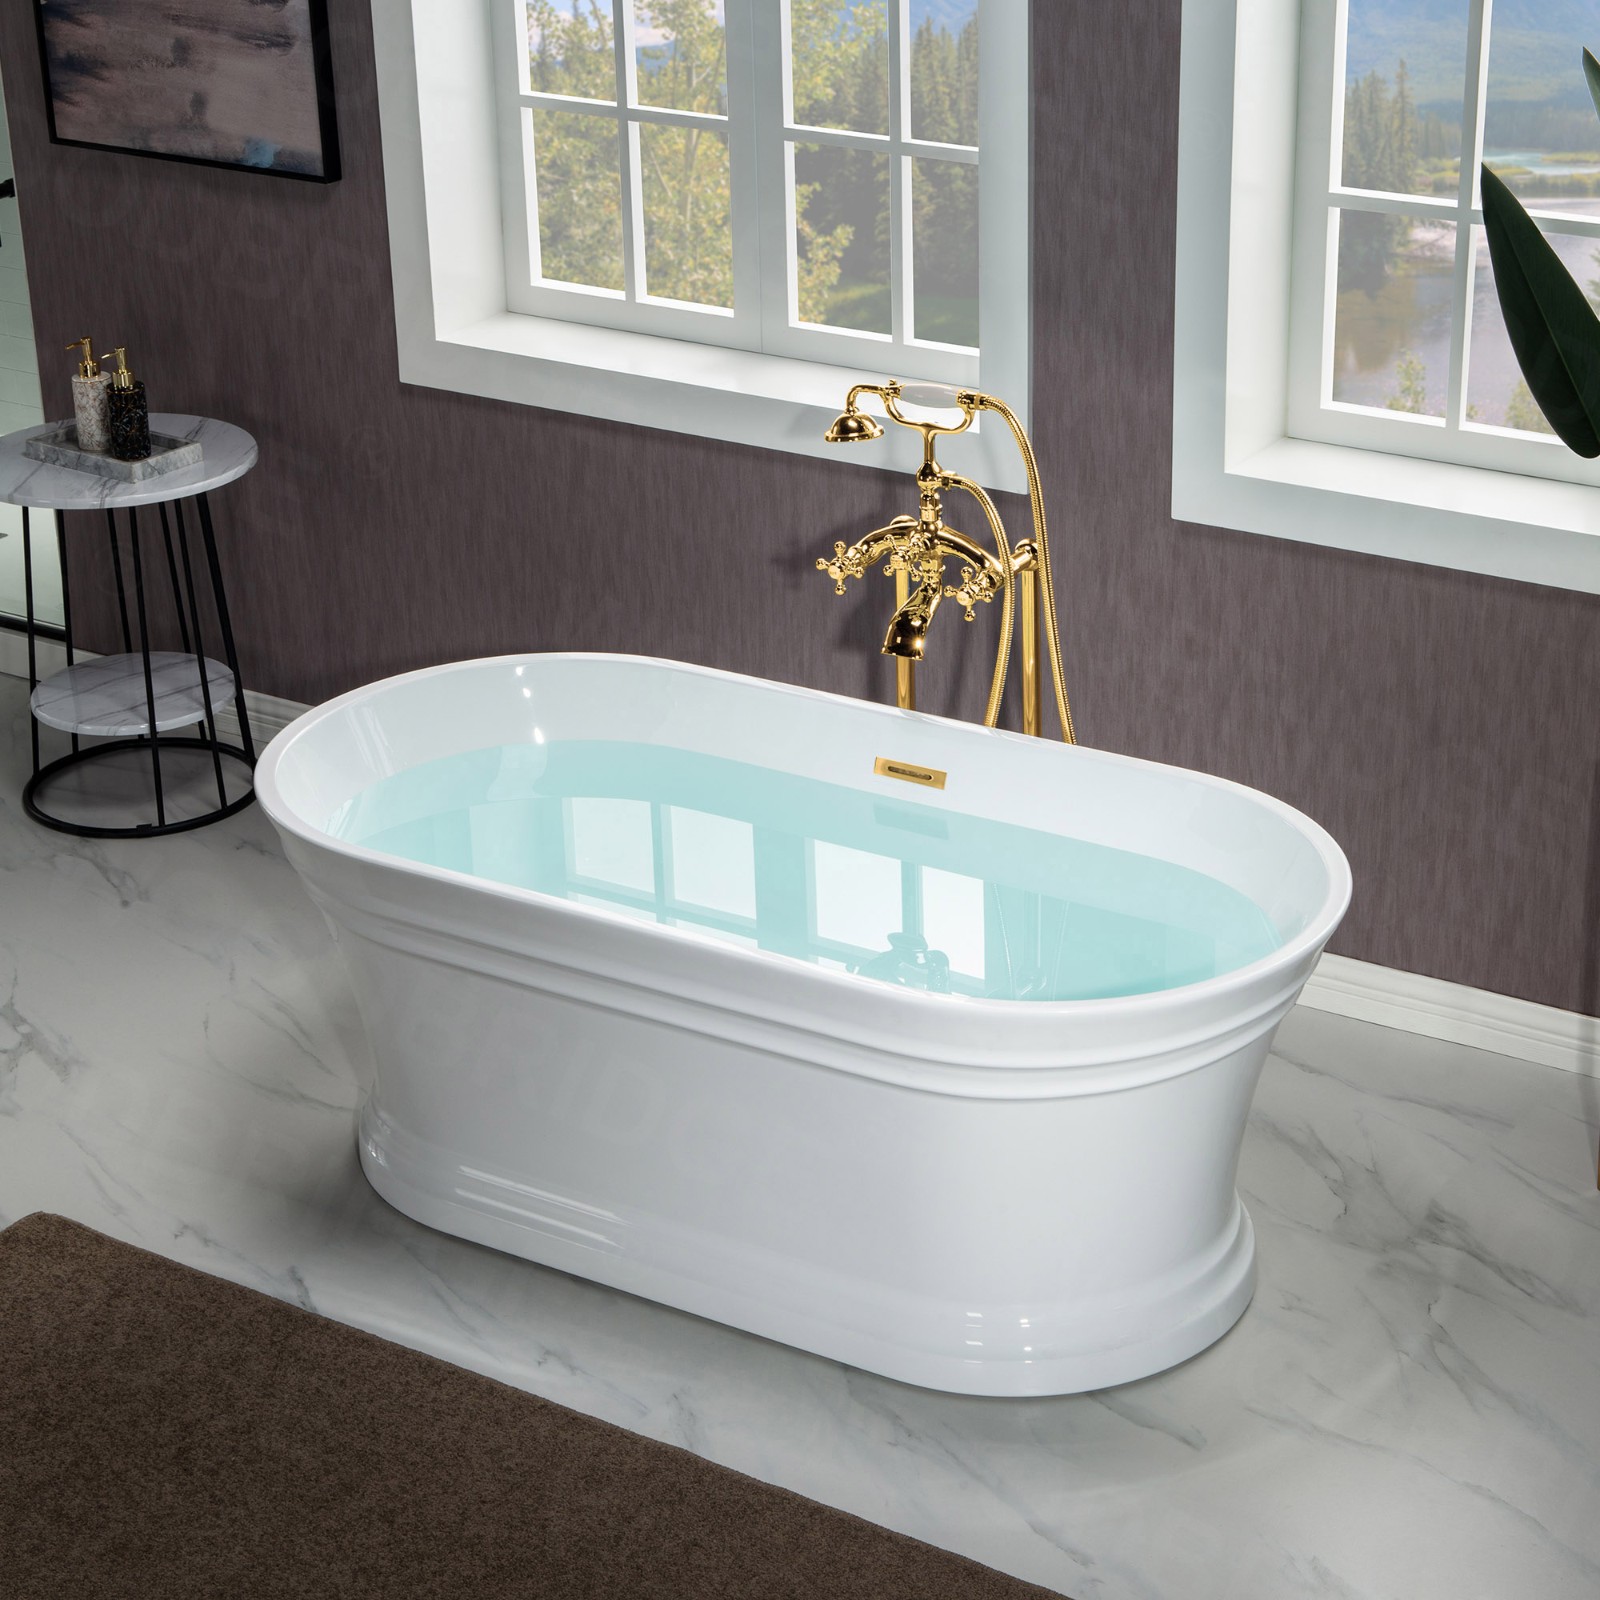  WOODBRIDGE 59 in. Freestanding Double Ended Acrylic Soaking Bathtub with Center Drain Assembly and Overflow, BTA1536/B1536, Glossy White_7797